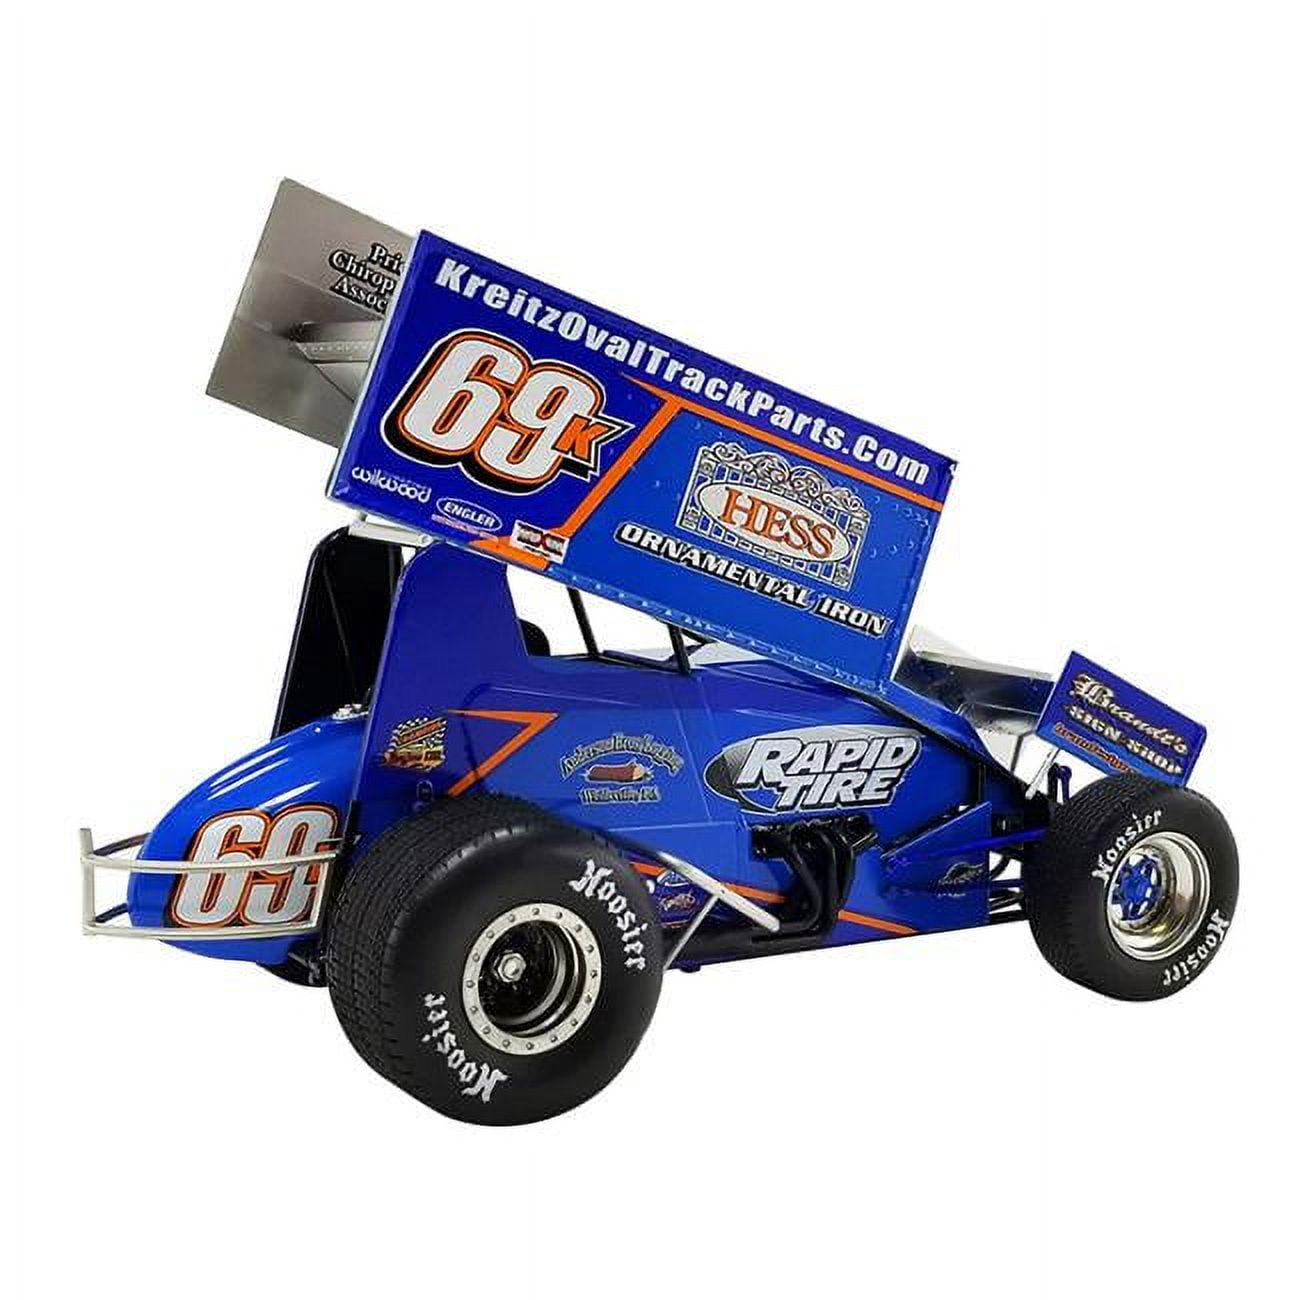 Picture of ACME A1822008 Winged Sprint Car No.69K Lance Dewease Hess Ornamental Iron Kreitz Racing World of Outlaws 2022 1 by 18 Scale Diecast Model Car